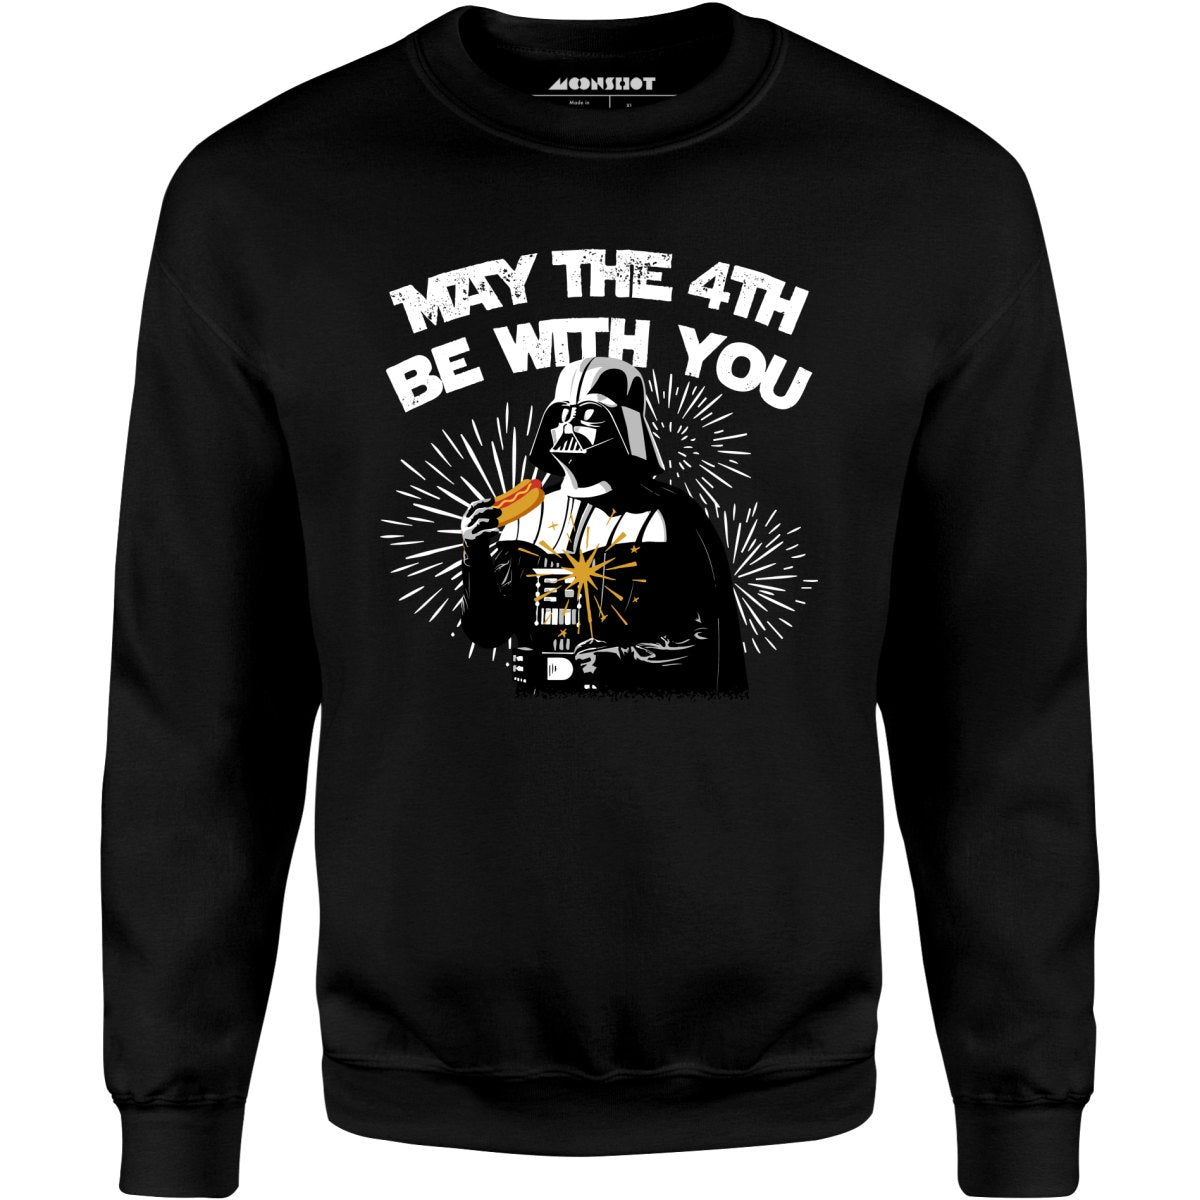 May The 4th Be With You - Unisex Sweatshirt